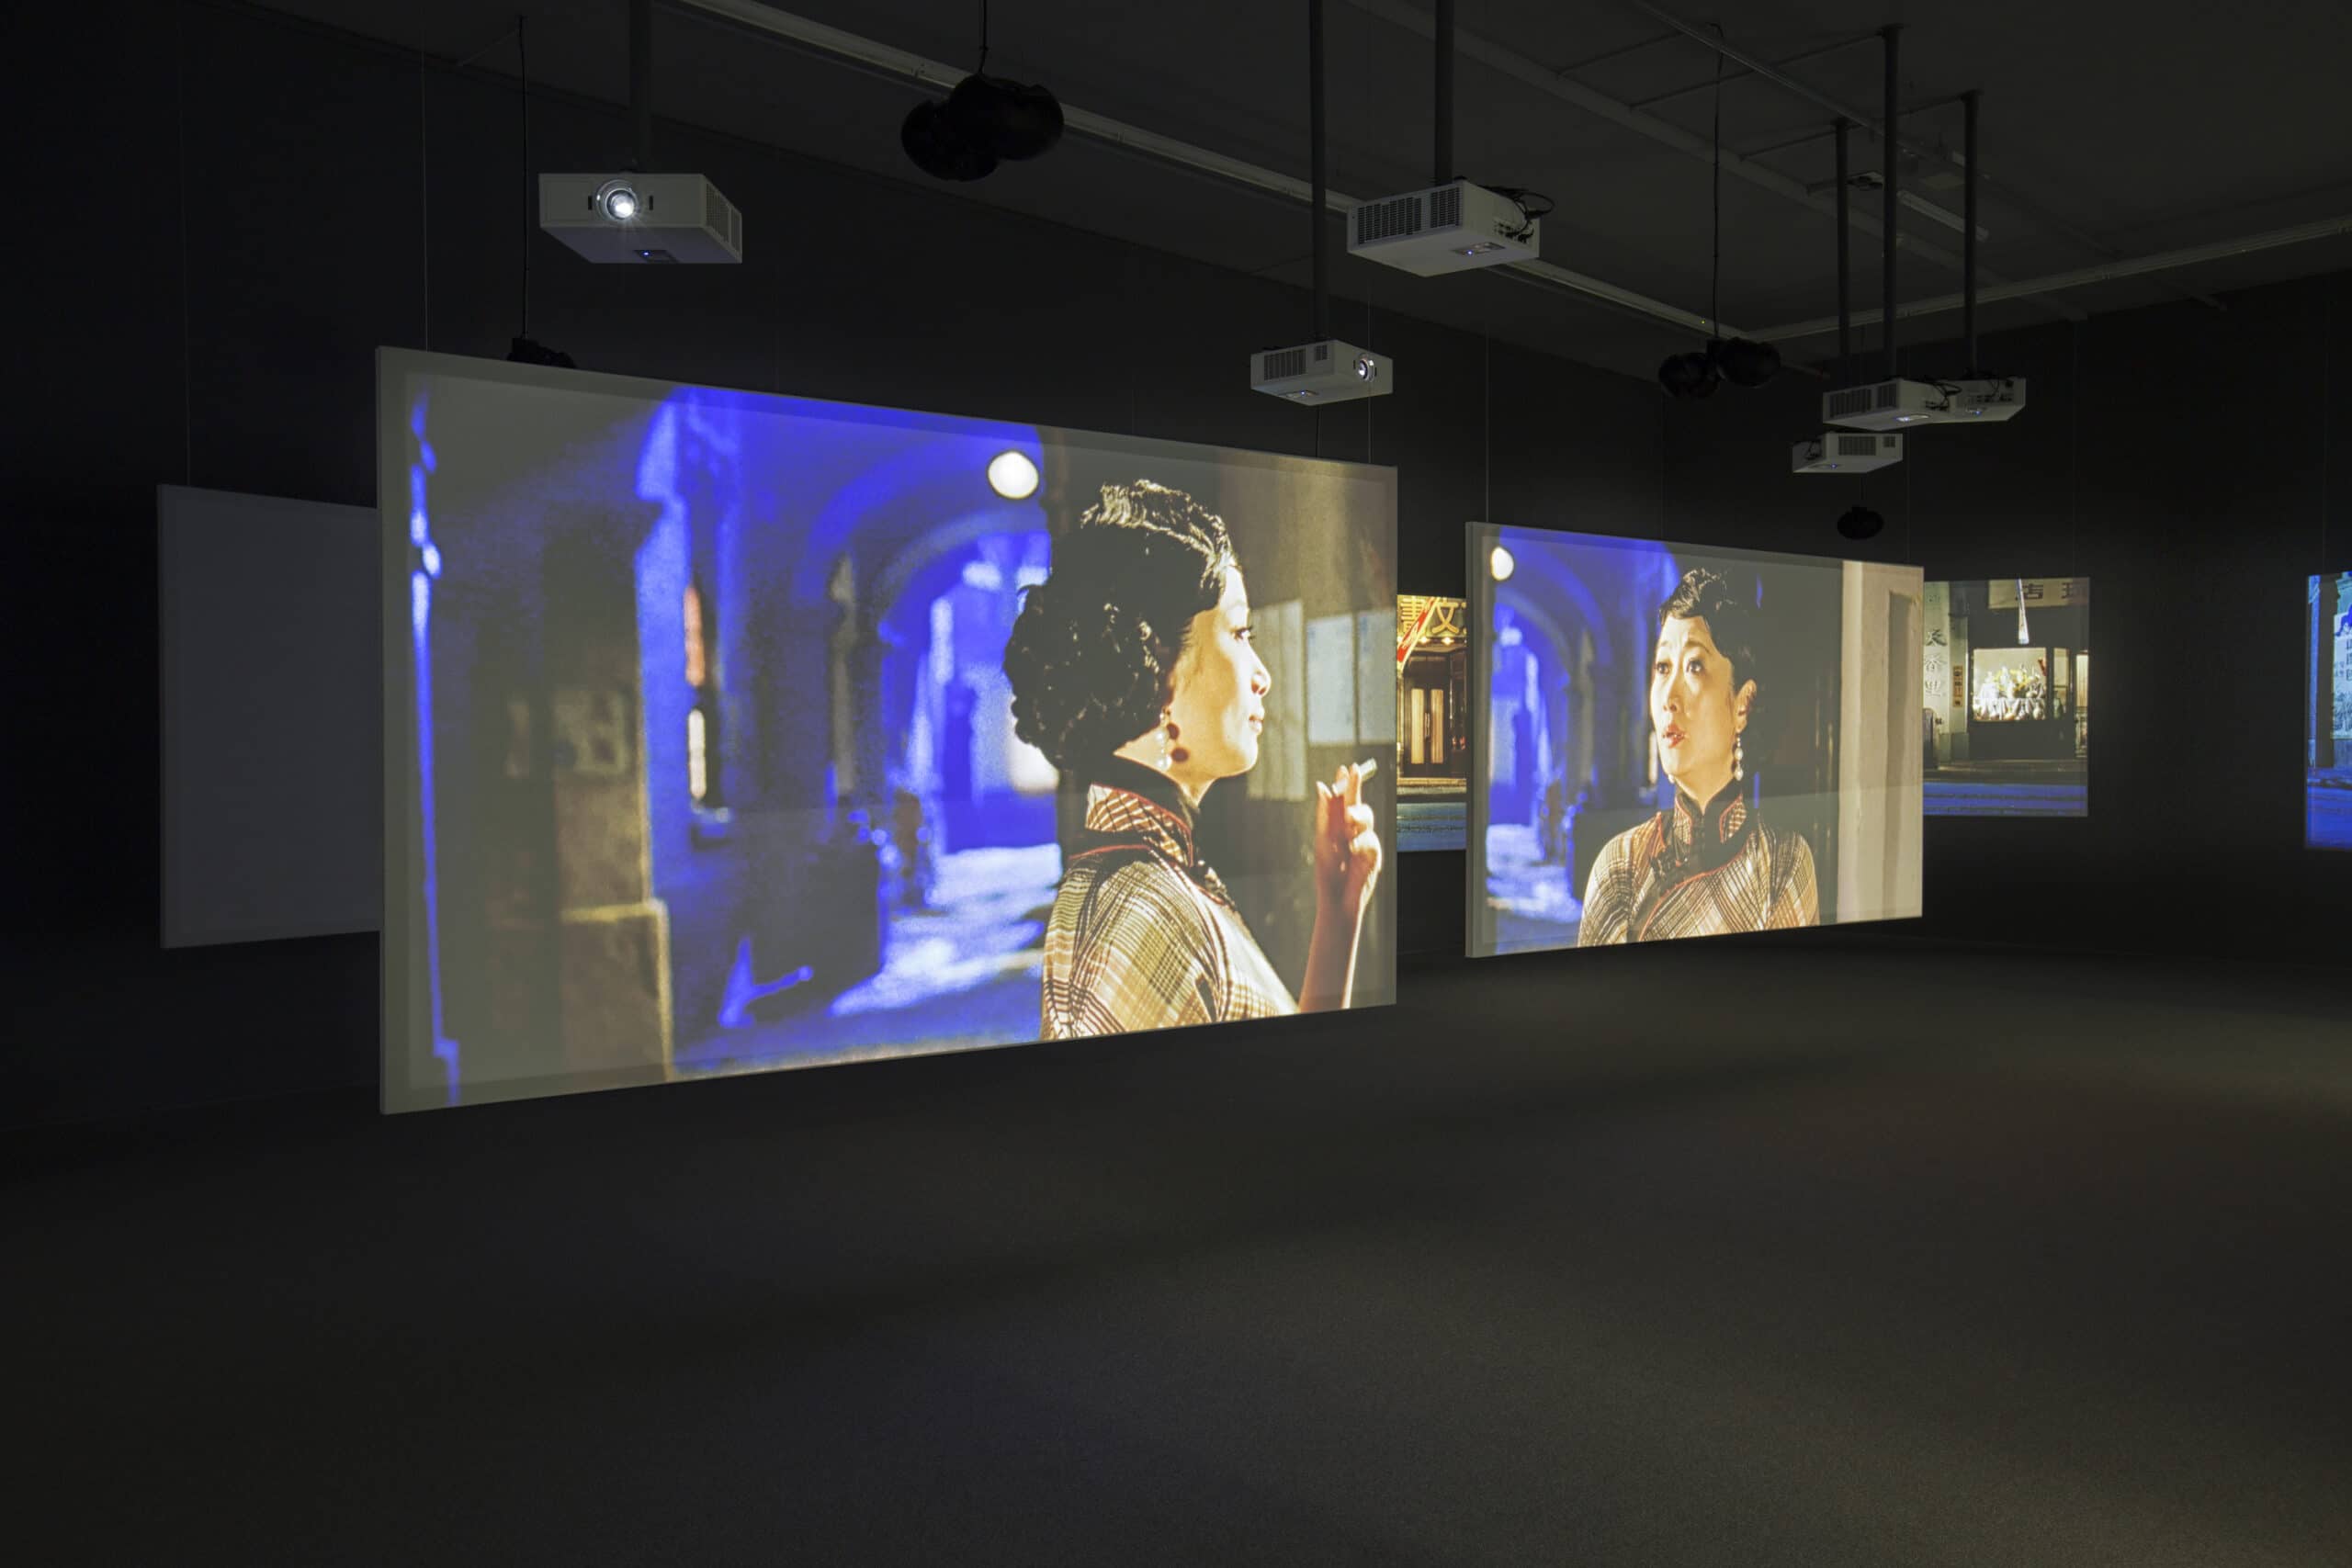 3728Isaac Julien. Ten Thousand Waves. 2009. Digital video (colour, sound). 55 minutes. On long-term loan from the Zeitz Collection. (Installation view)